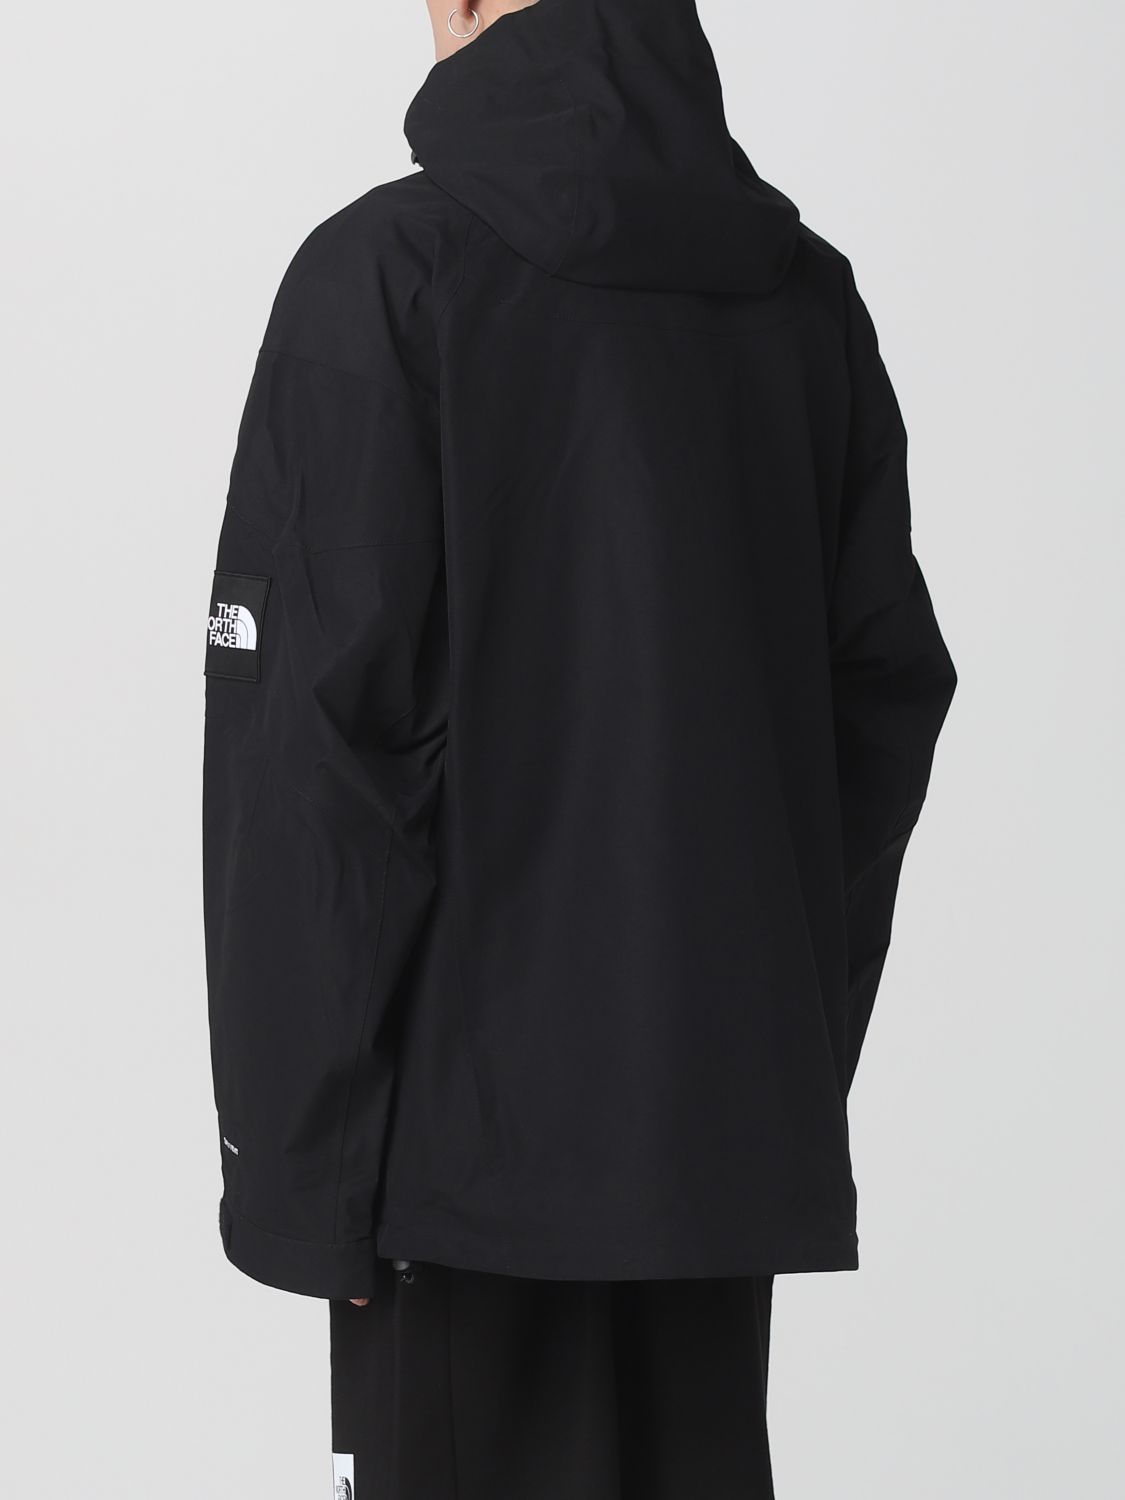 Giacca The North Face: Giacca Carduelis Dryvent™ 3L The North Face in tessuto sintetico nero 3